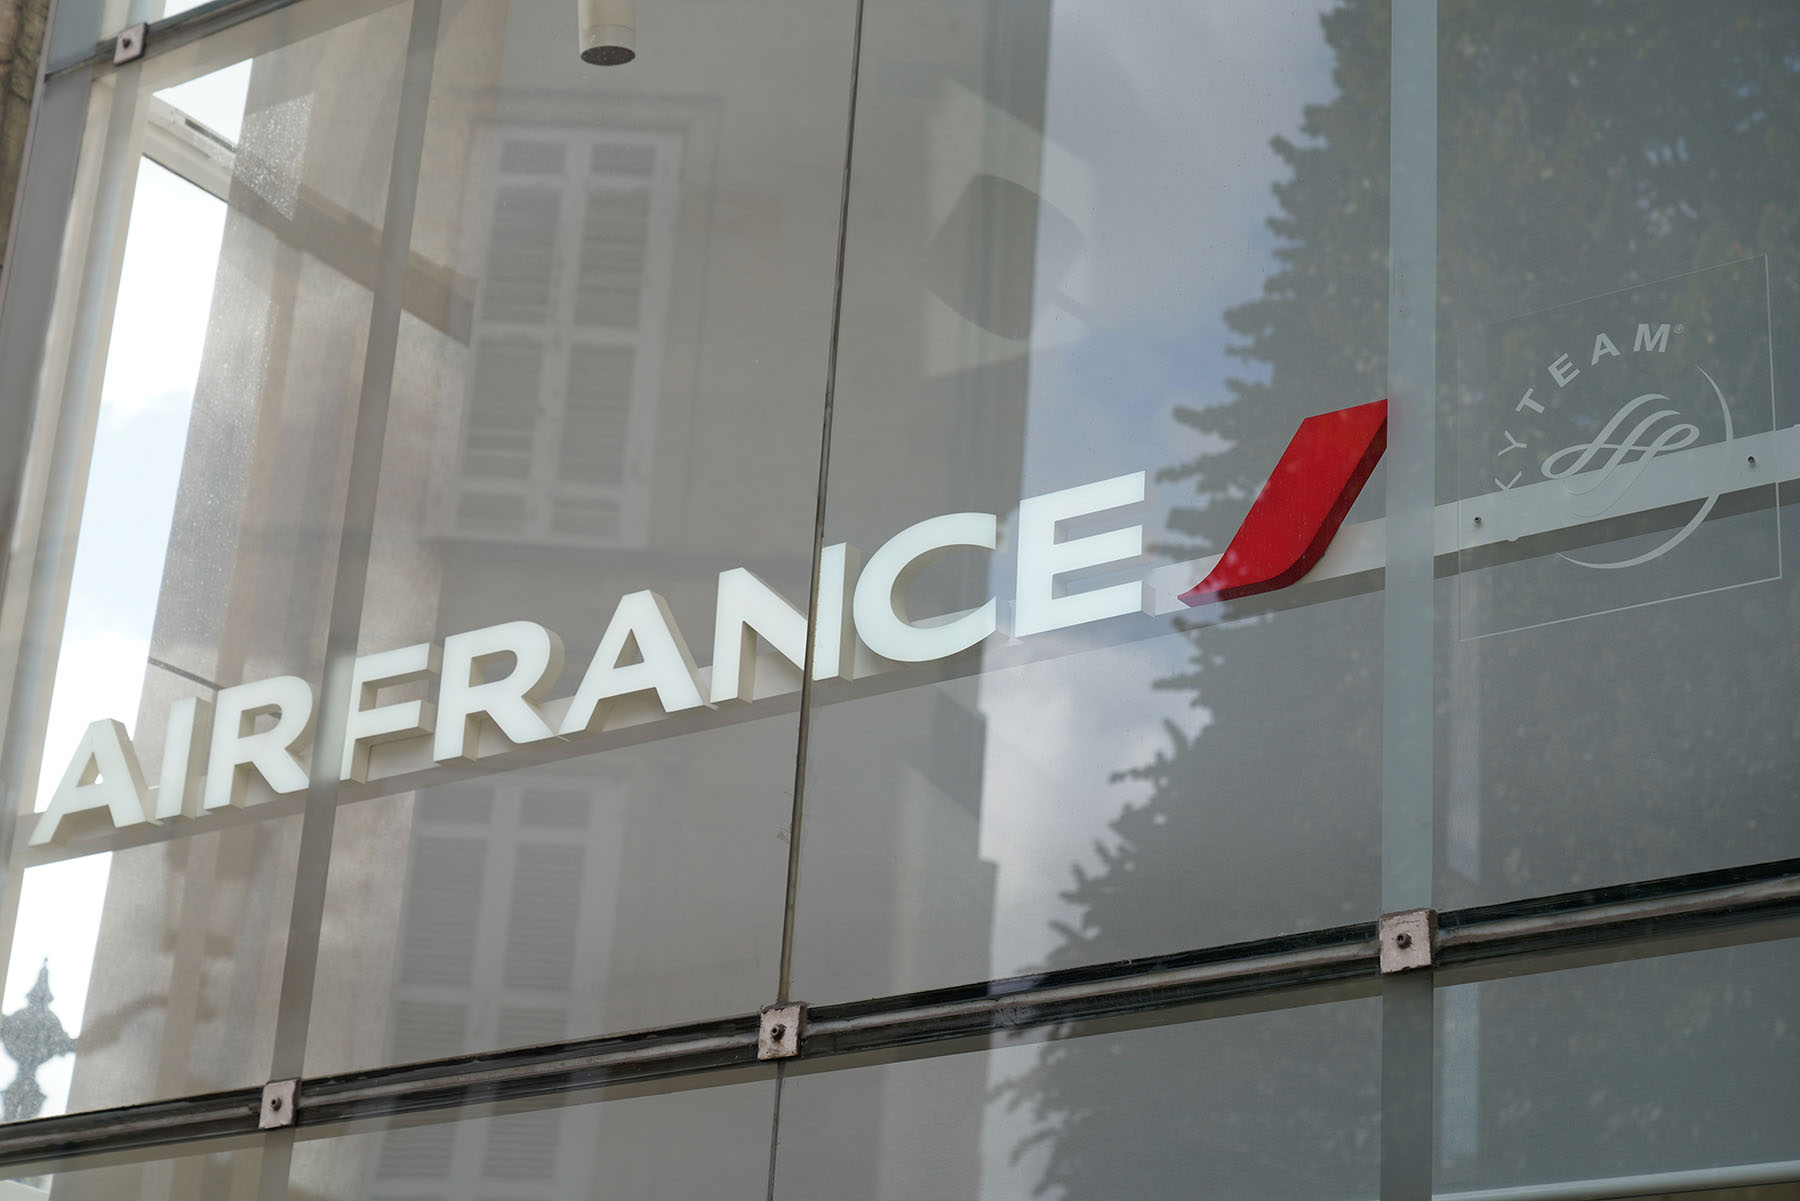 An Air France logo on the exterior of a building